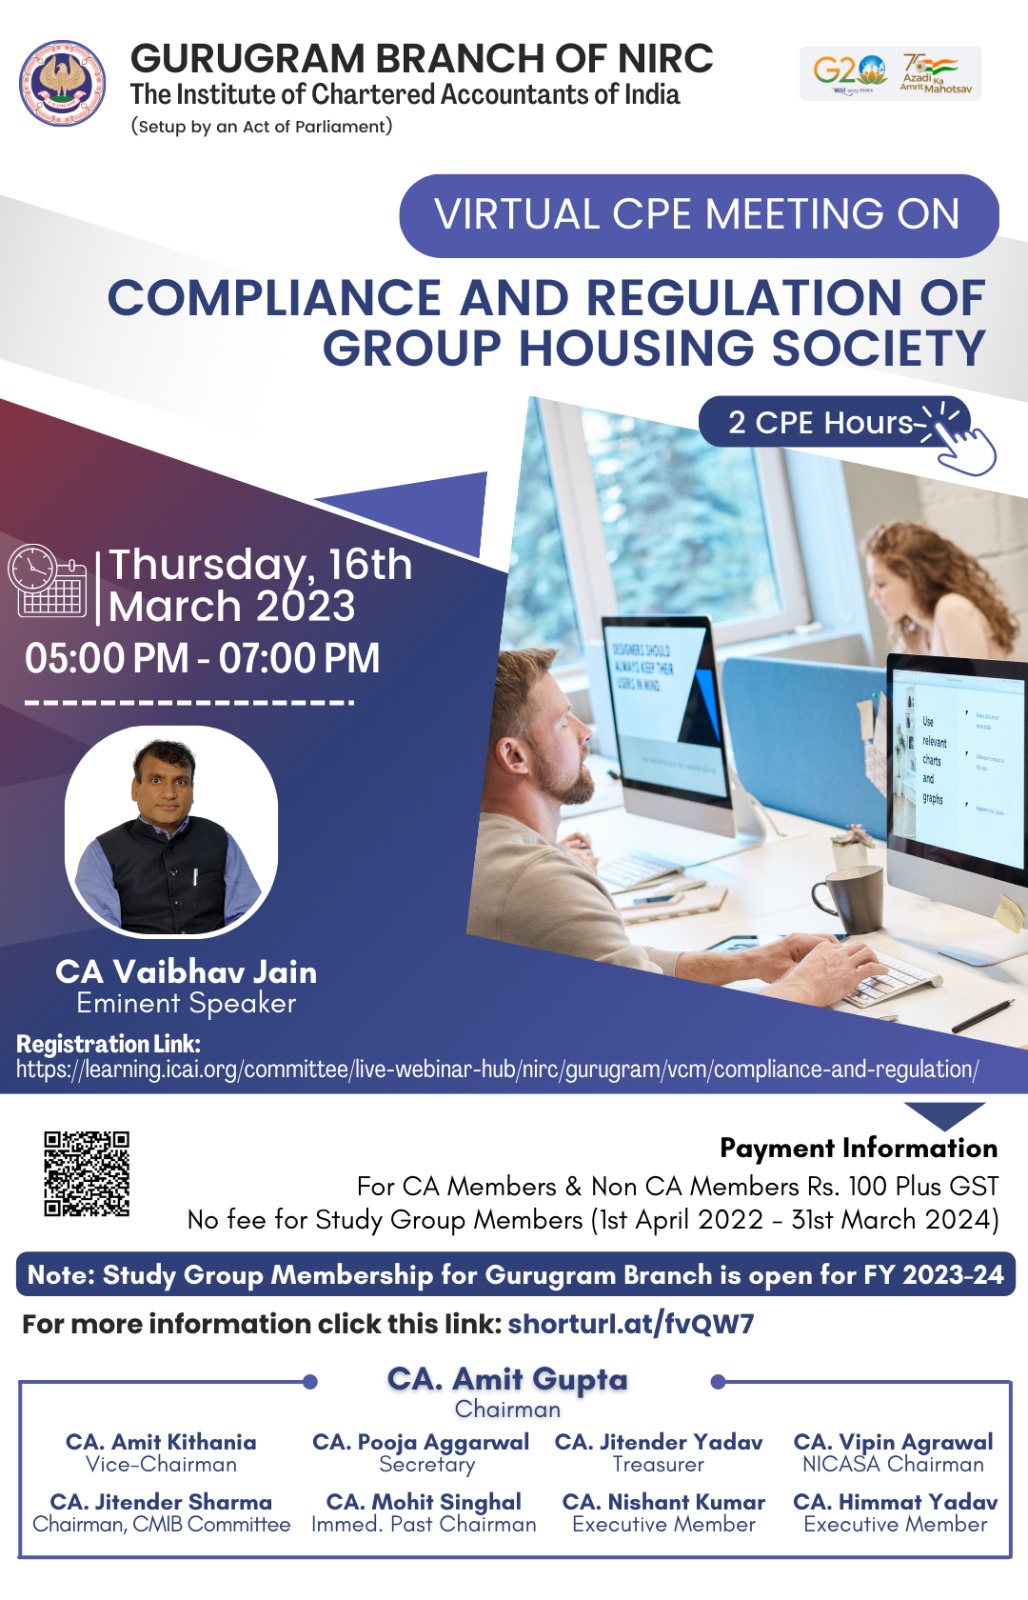 Virtual CPE Meeting on Compliance and Regulation of Group Housing Society